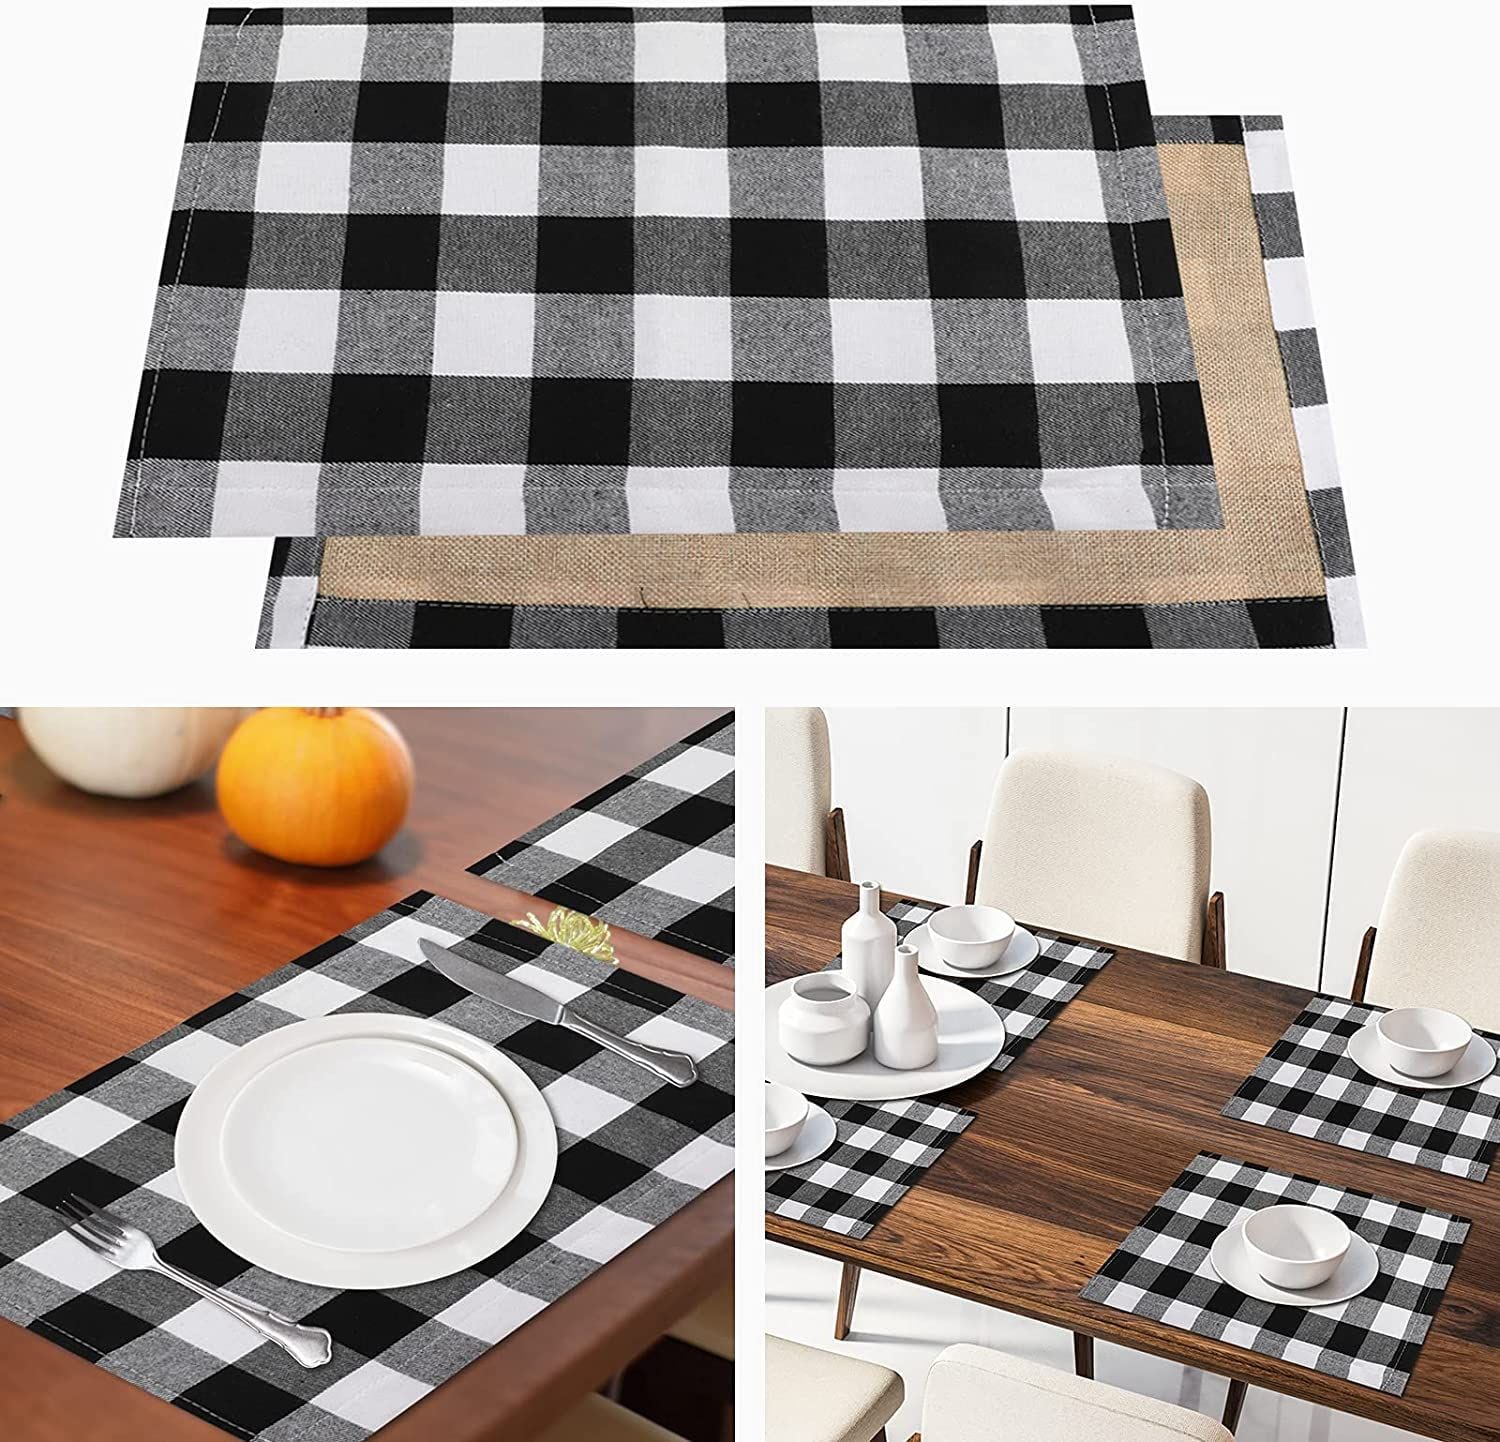 These check print placemats from Amazon instantly warm up a dining table.